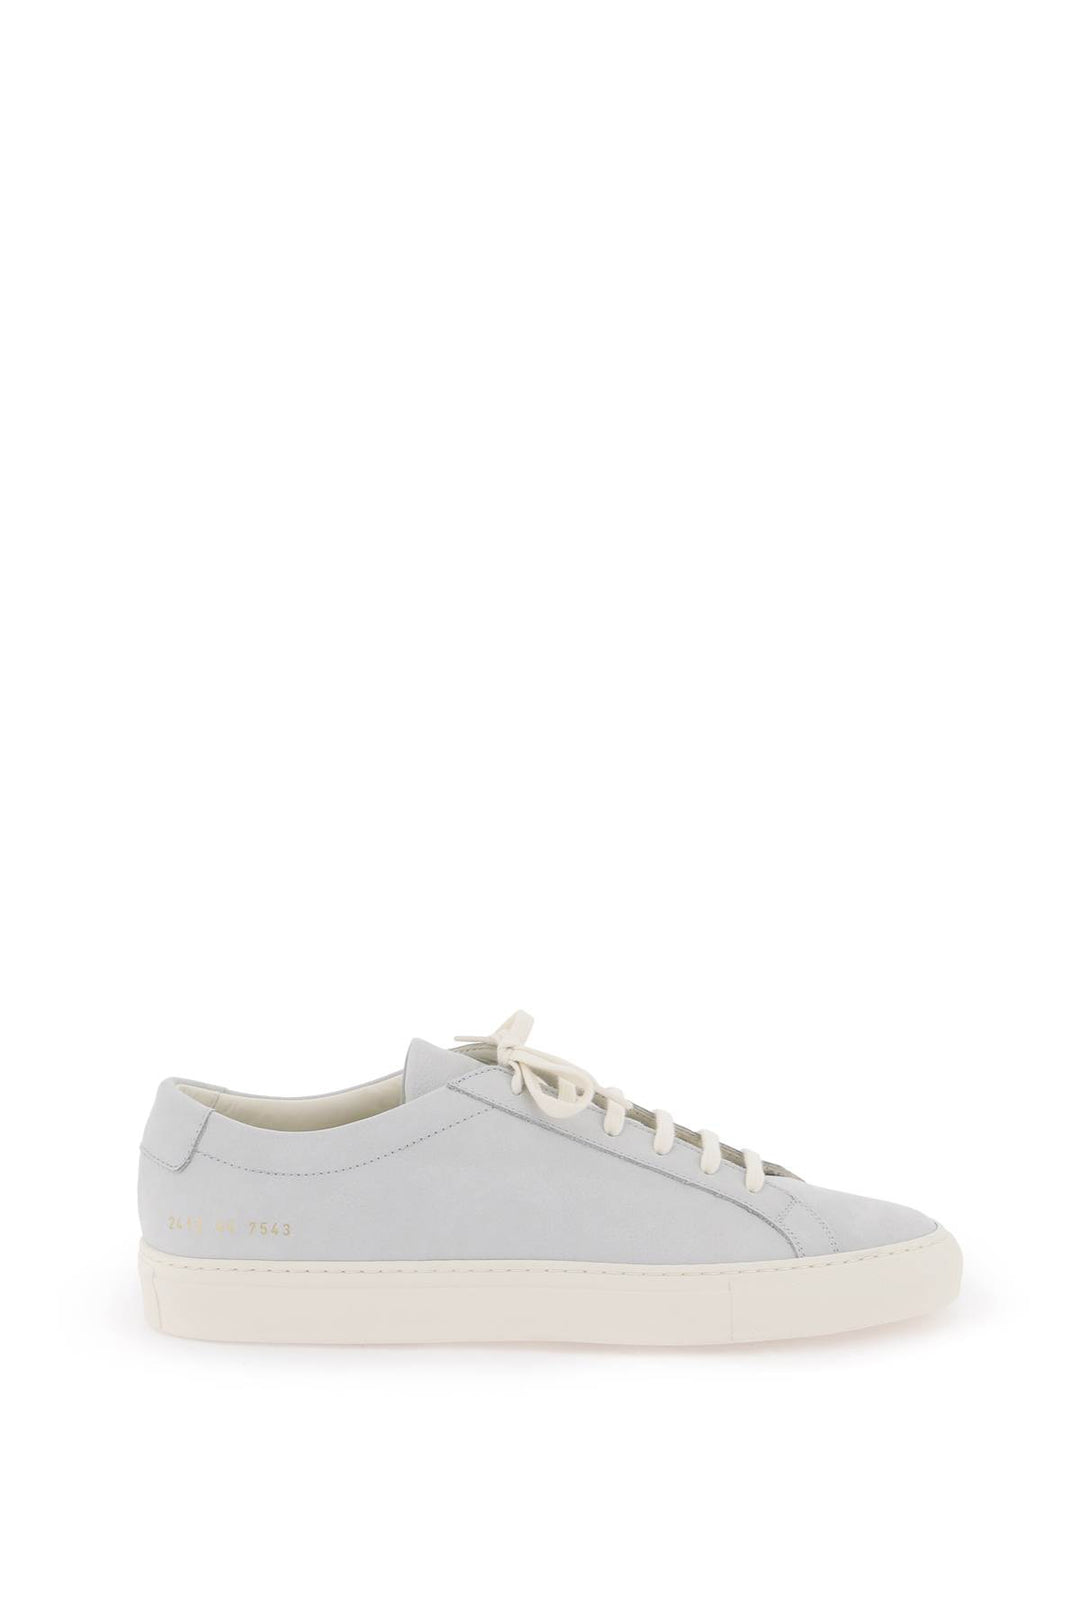 Common Projects Original Achilles Leather Sneakers   Grigio